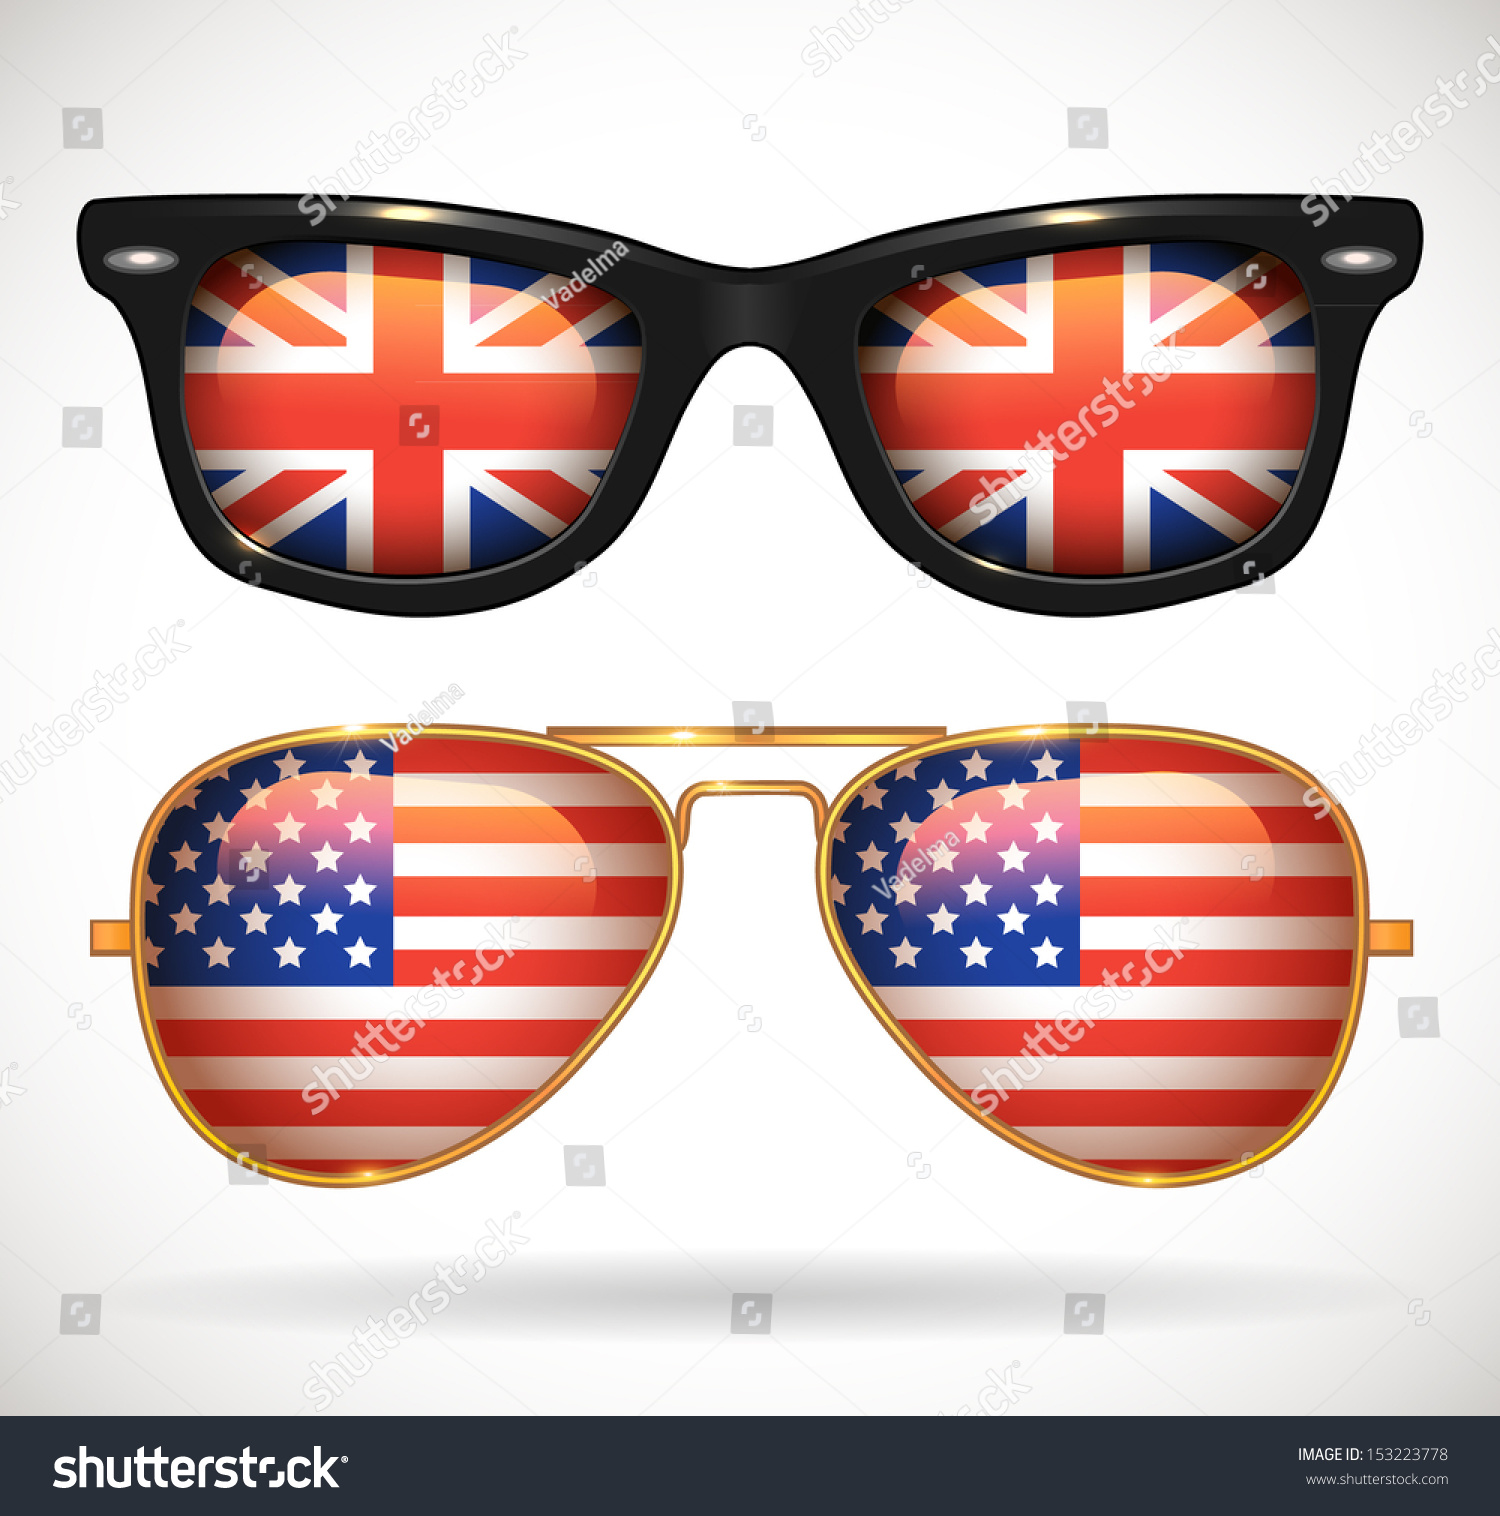 SVG of Set of sunglasses with british and american flag reflections - vector illustration. svg